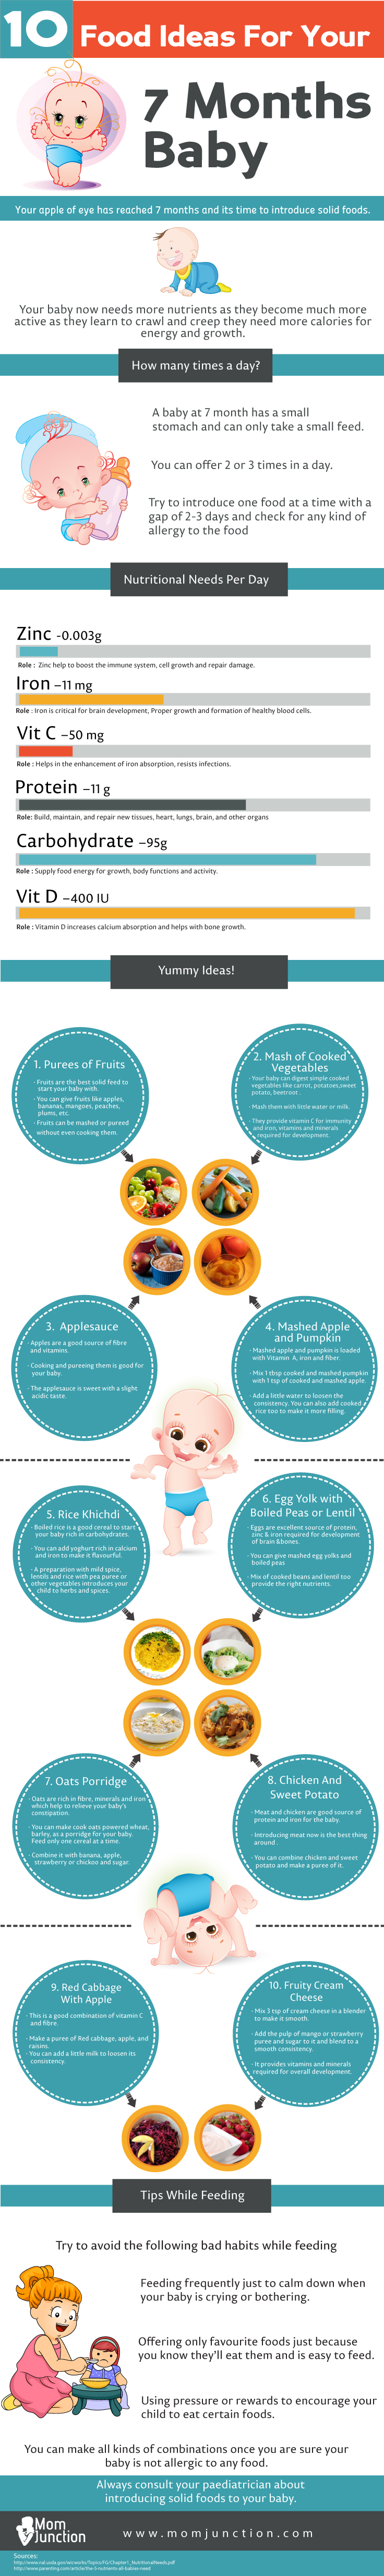 Top 10 Food Ideas For Your 7 Months Baby